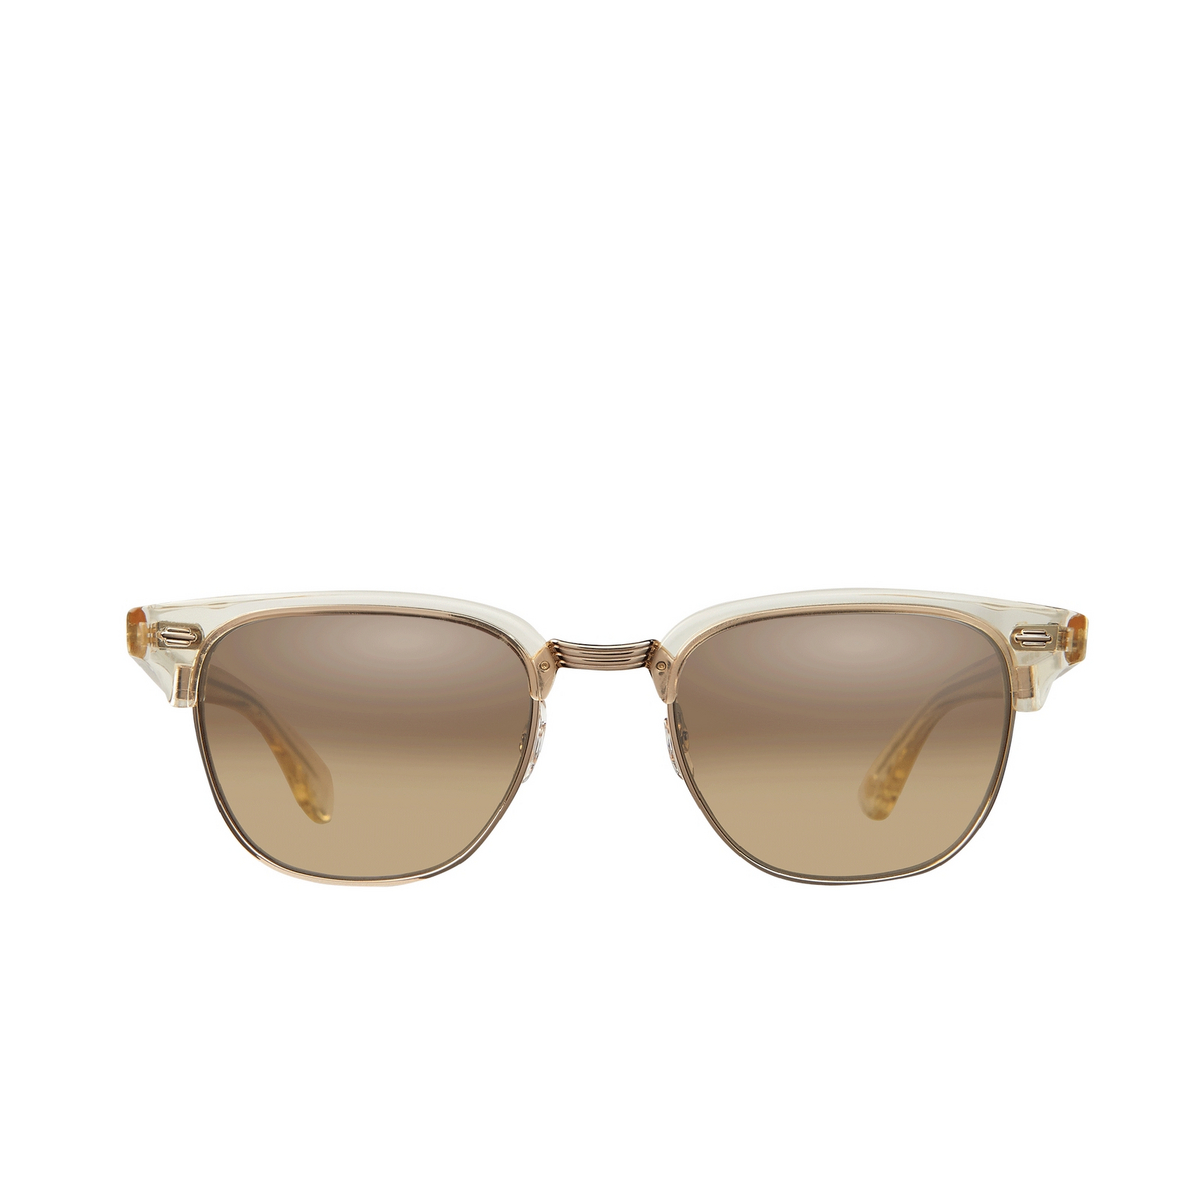 Garrett Leight ELKGROVE Sunglasses PG-G/BRLM Pure Glass-Gold/Brown Layered Mirror - front view